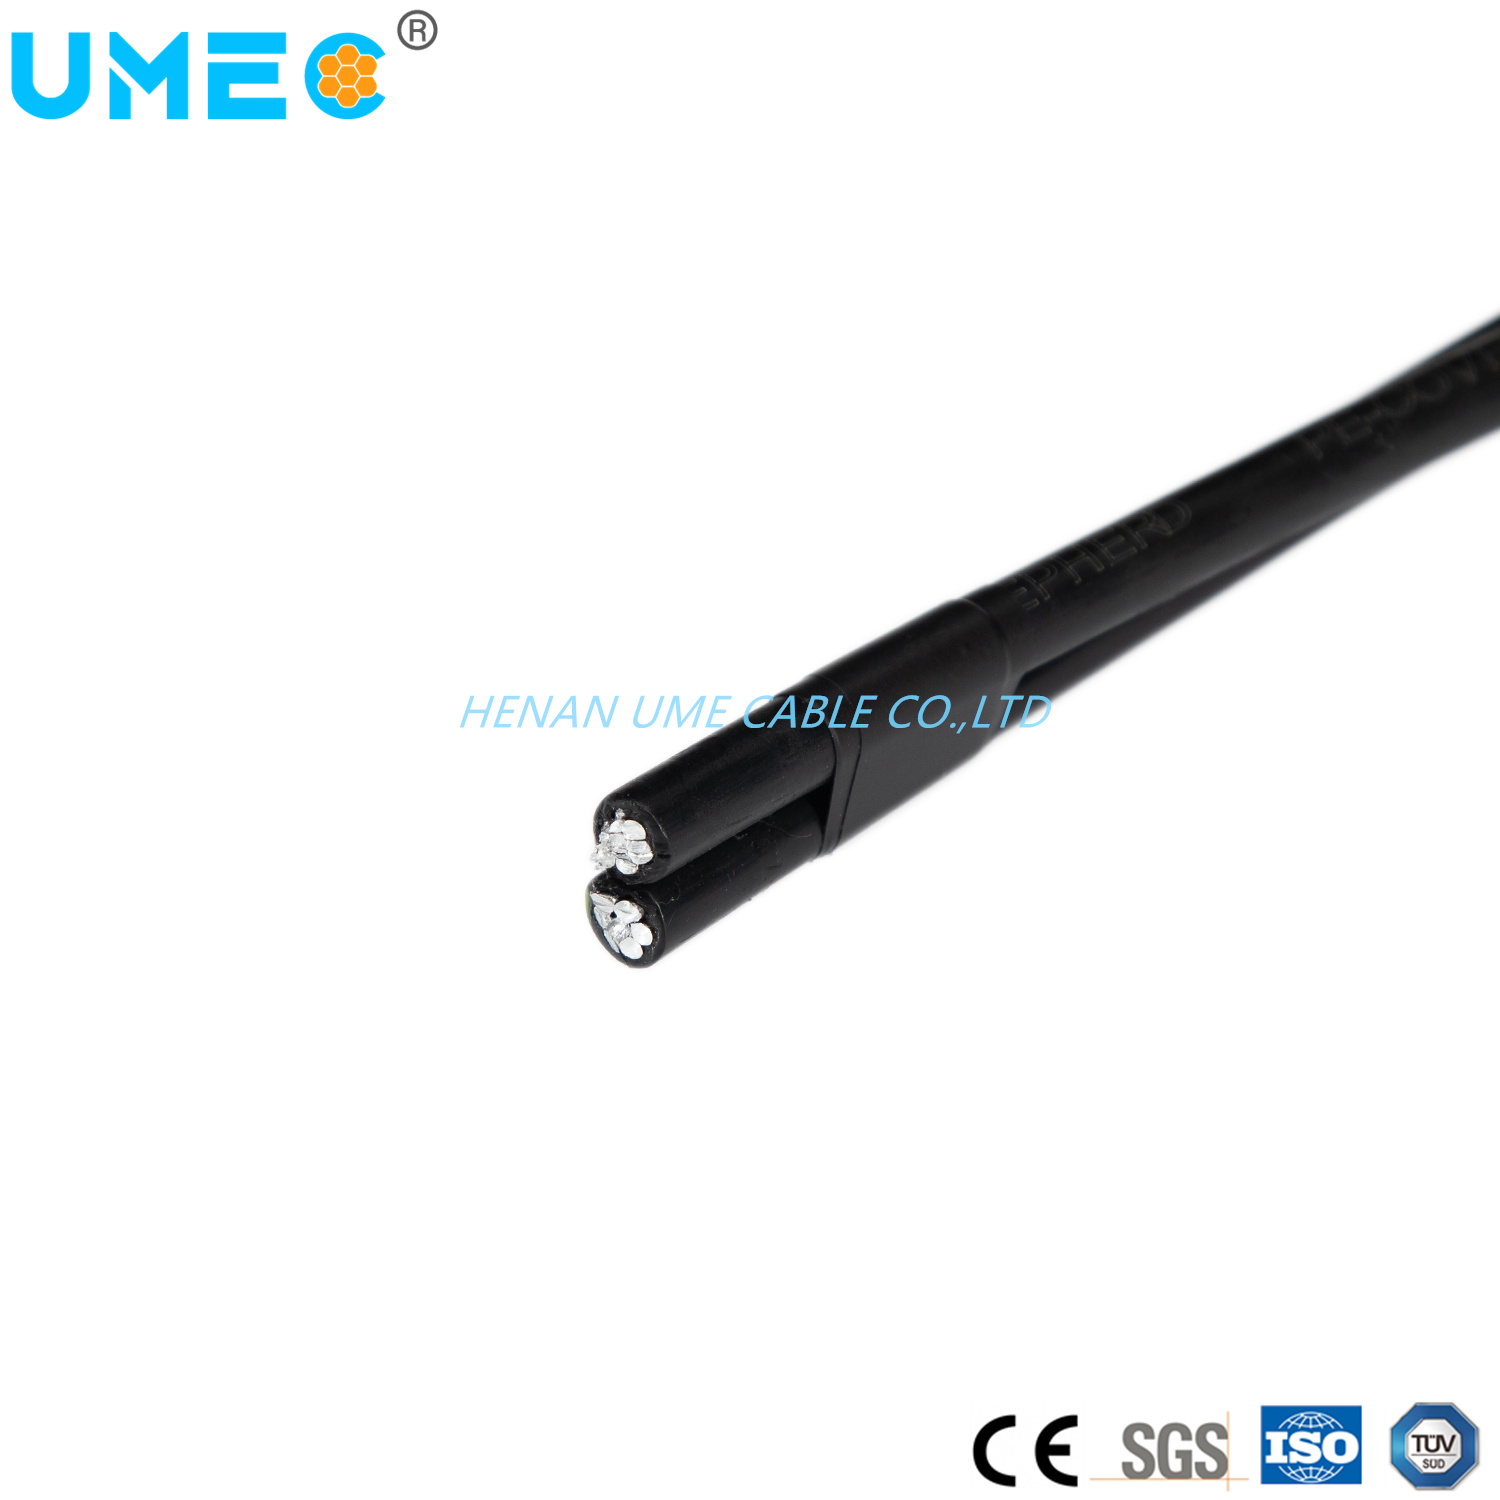 Overhead Aluminium Conductor XLPE Insulated Electric Cable Duplex Service Drop Electrical Wire ABC Cable